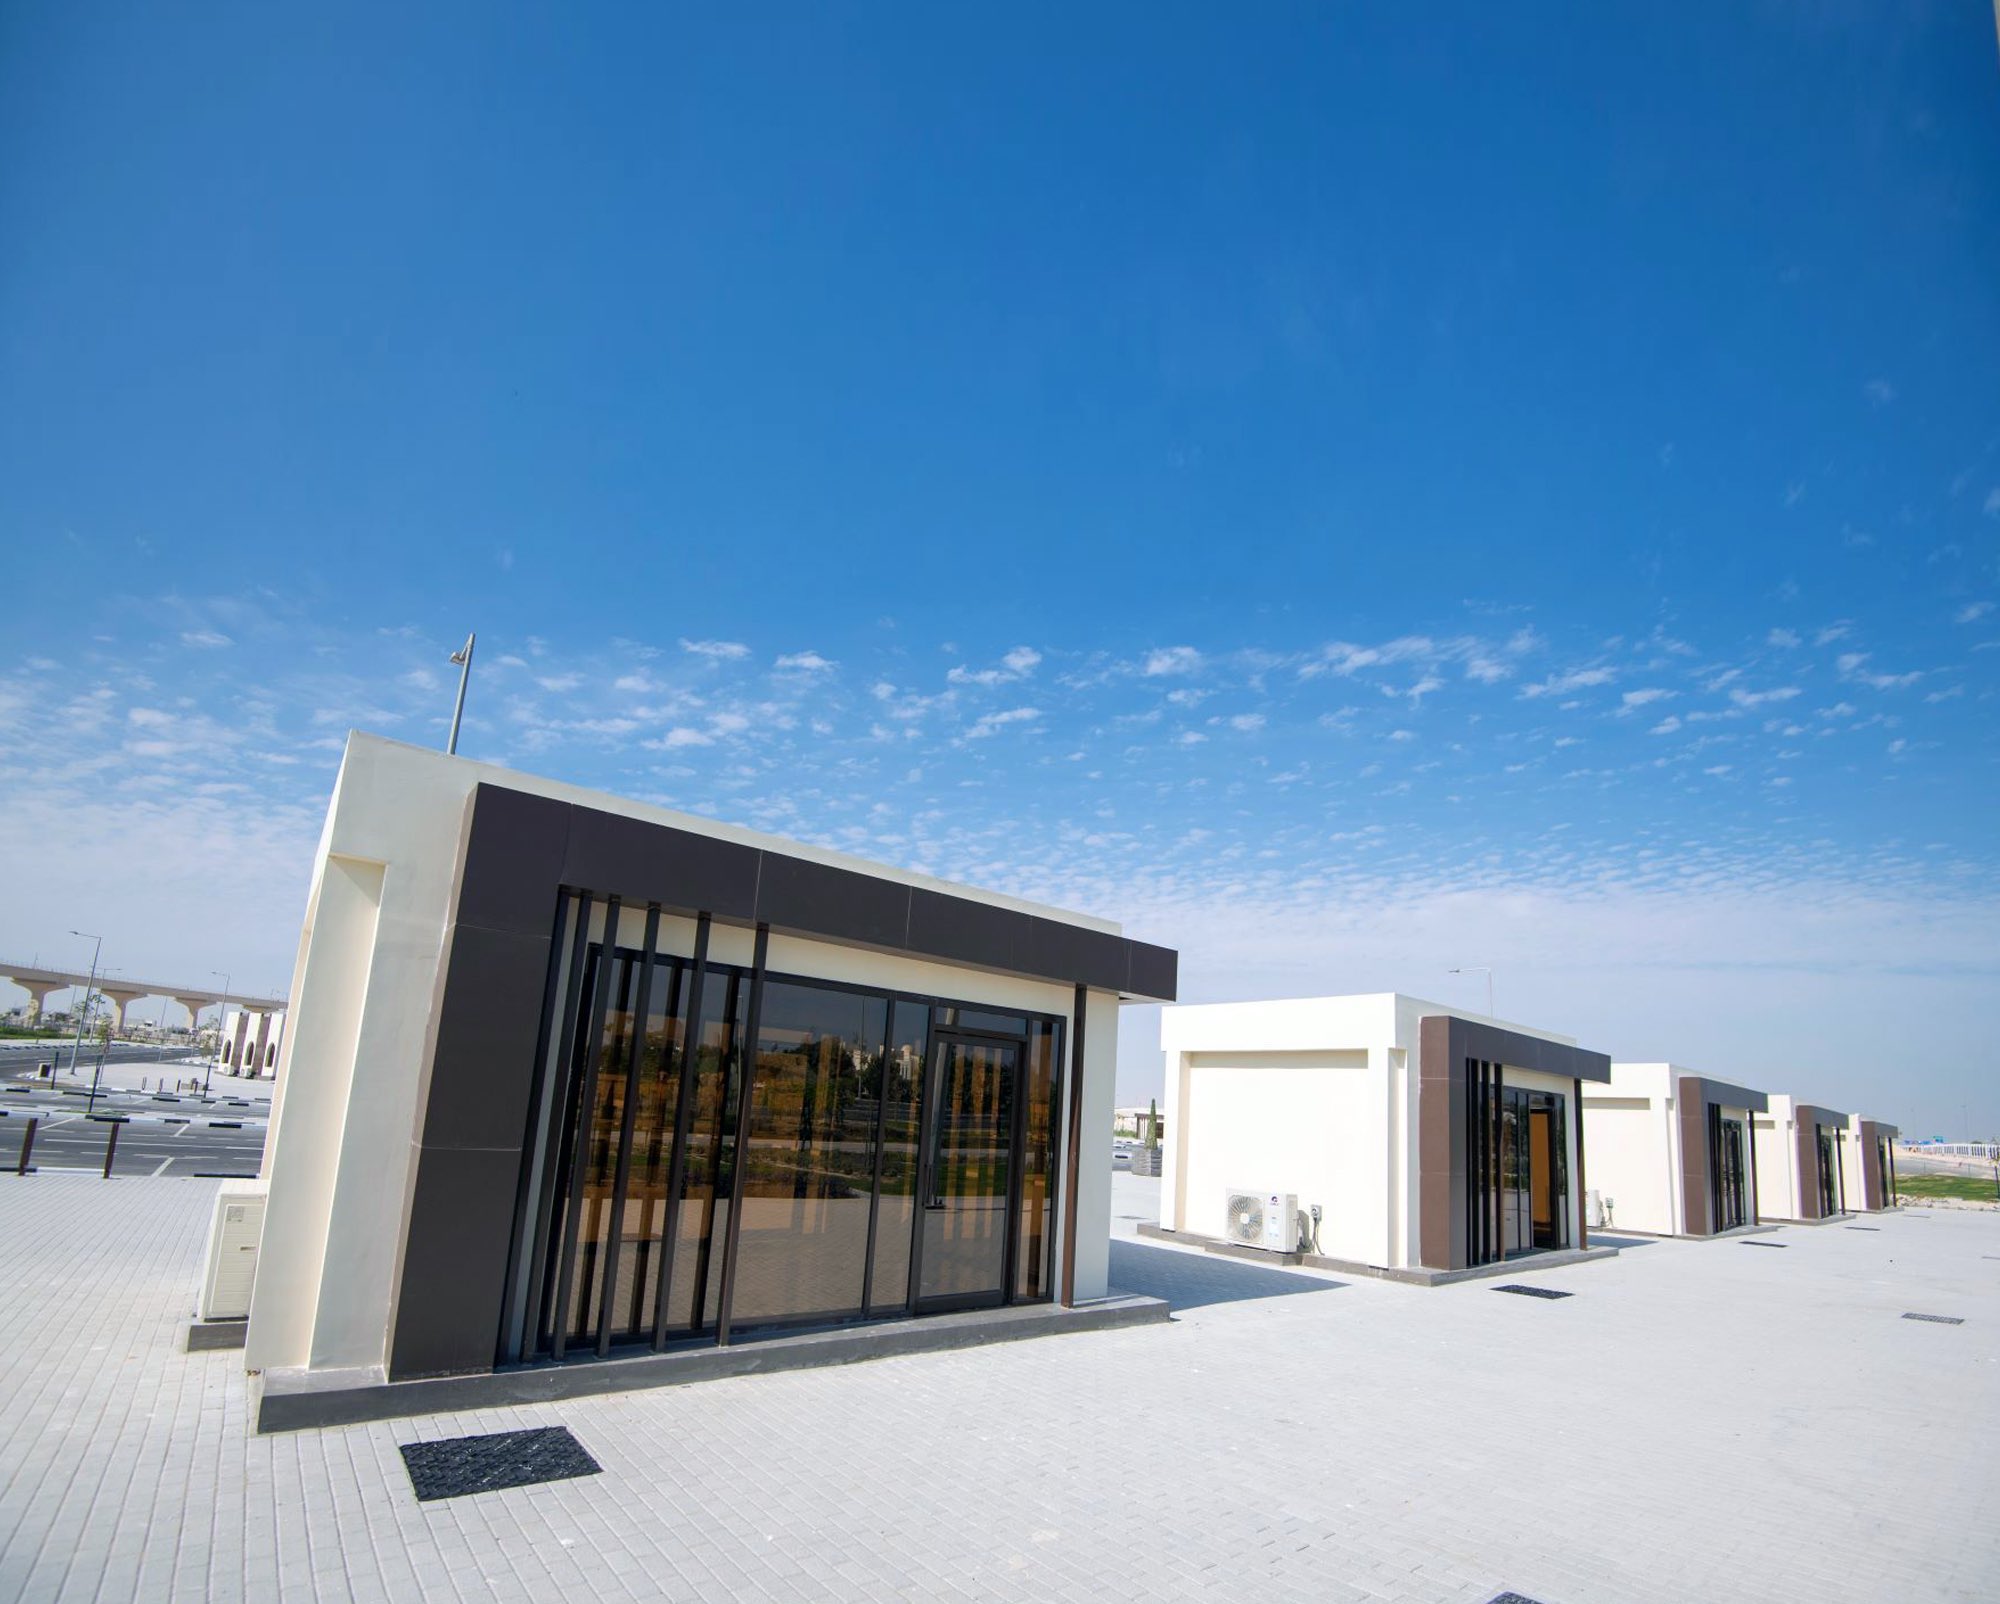 Ashghal Completes Rest Lounge and Parking for Olympic Cycling Track on Al Khor Road